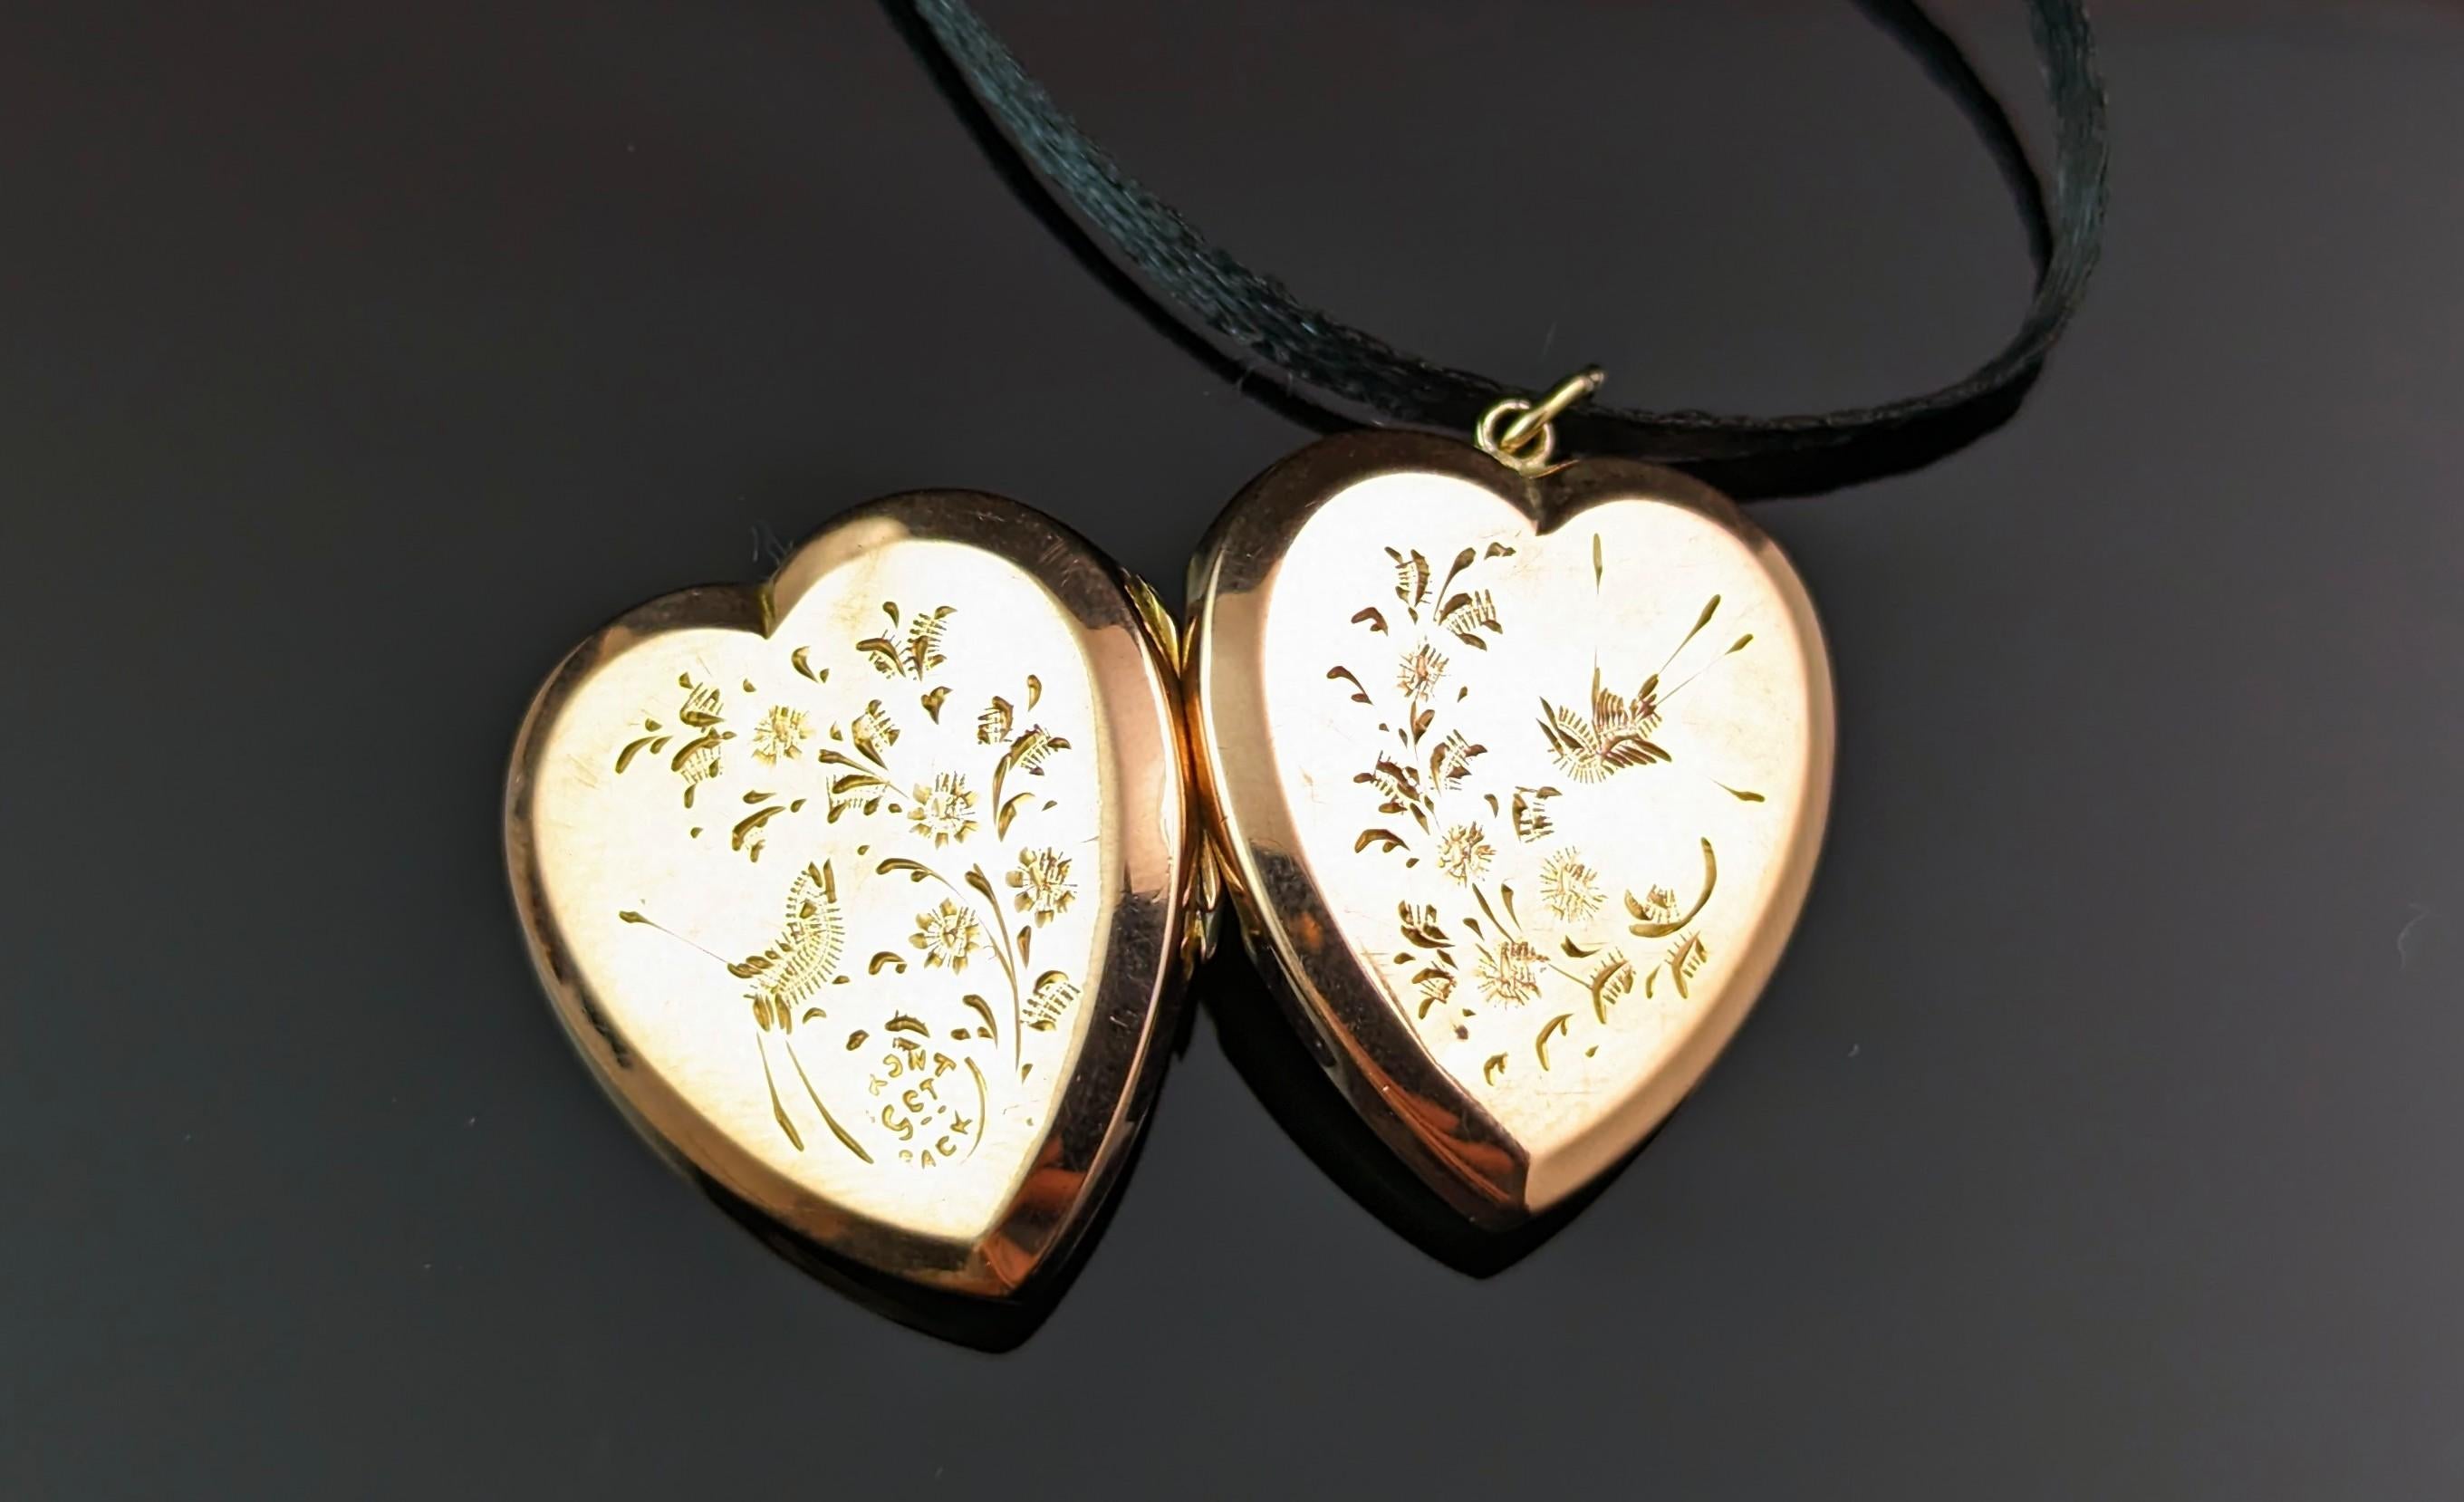 A sweet little antique 9ct gold front and back, heart shaped locket pendant.

Edwardian era it has elaborately engraved designs to the front and back featuring birds and foliage in an aesthetic manner.

Internally it has two compartments but no